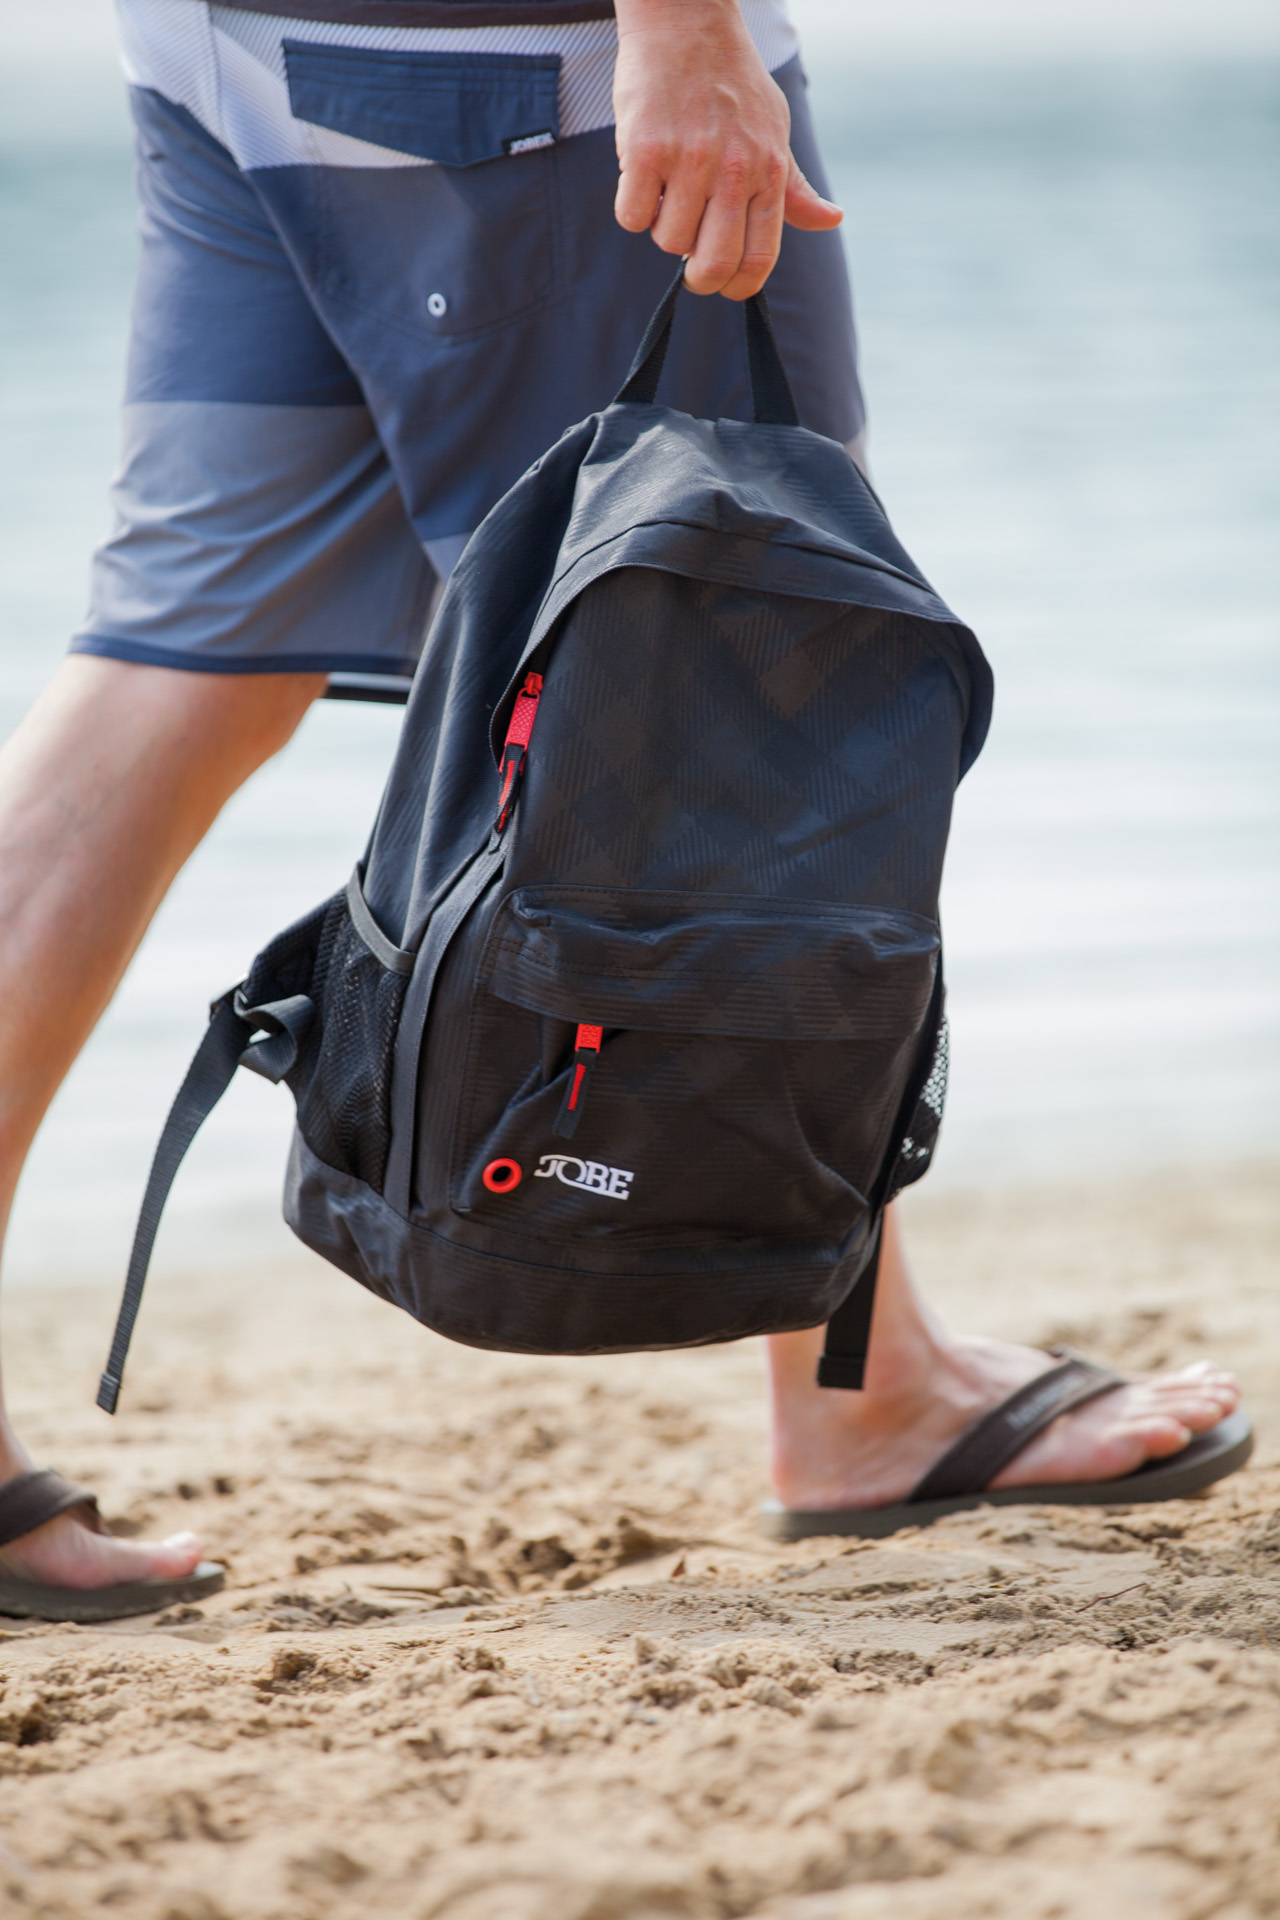 Carry your gear anywhere with the Jobe bags.